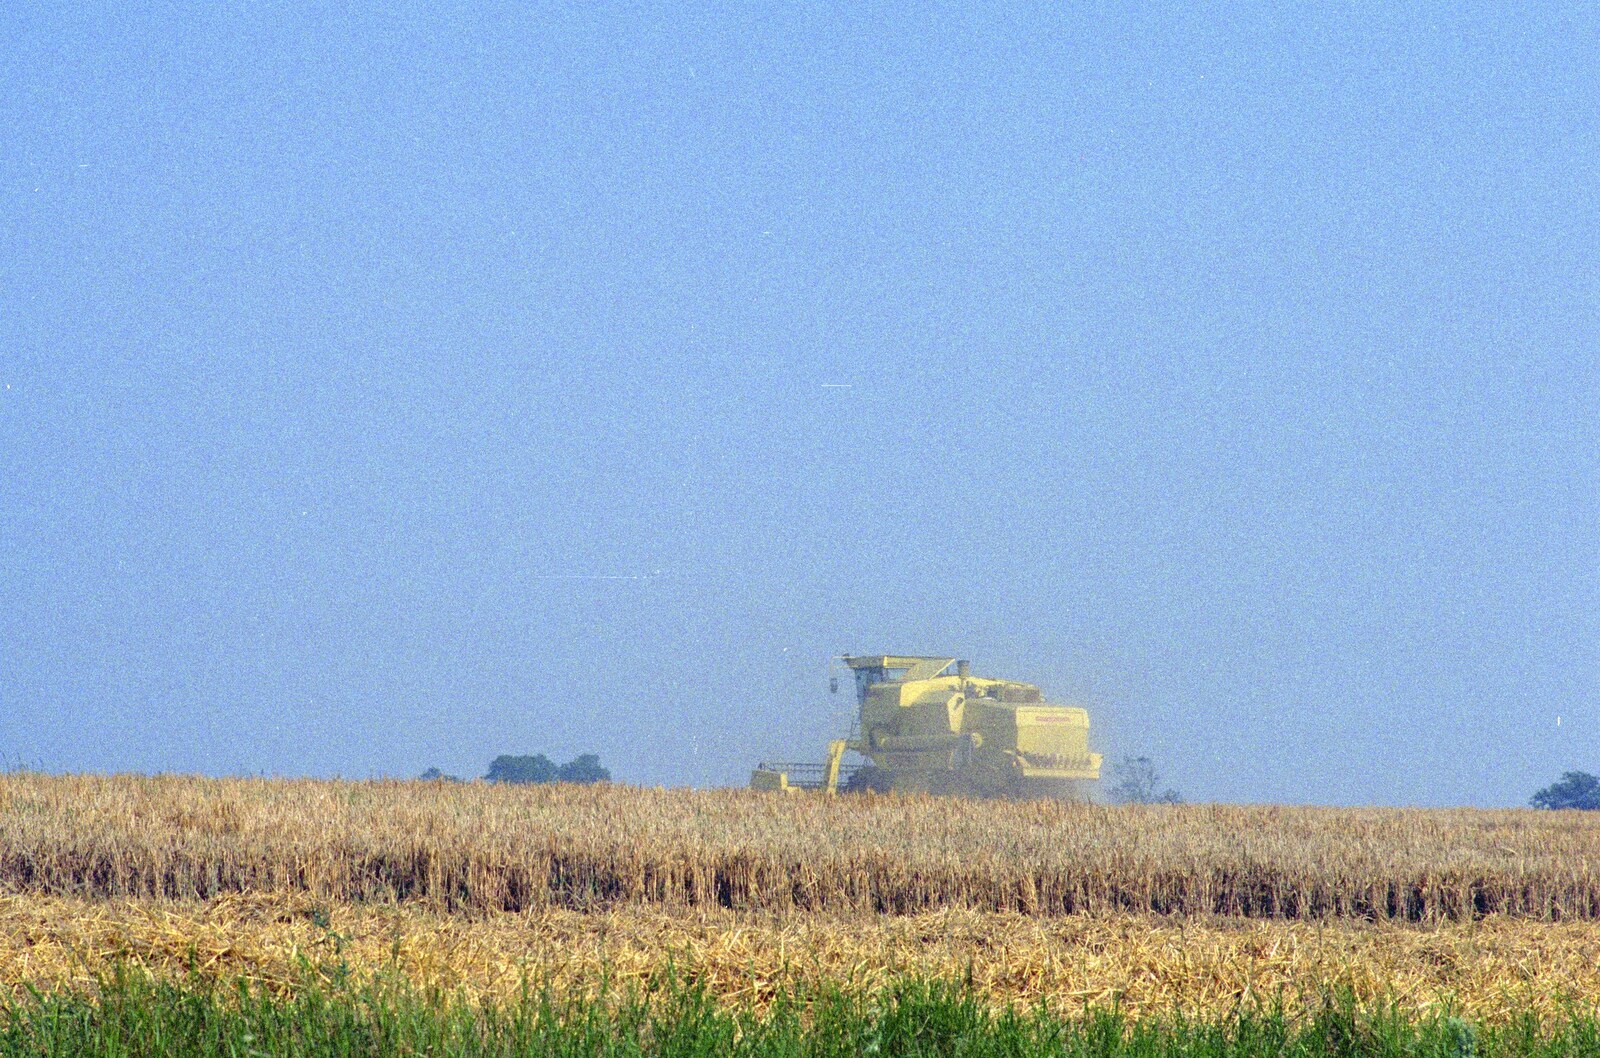 A combine harvester does its thing from Nosher Leaves BPCC Business Magazines, Colchester, Essex - 18th July 1991